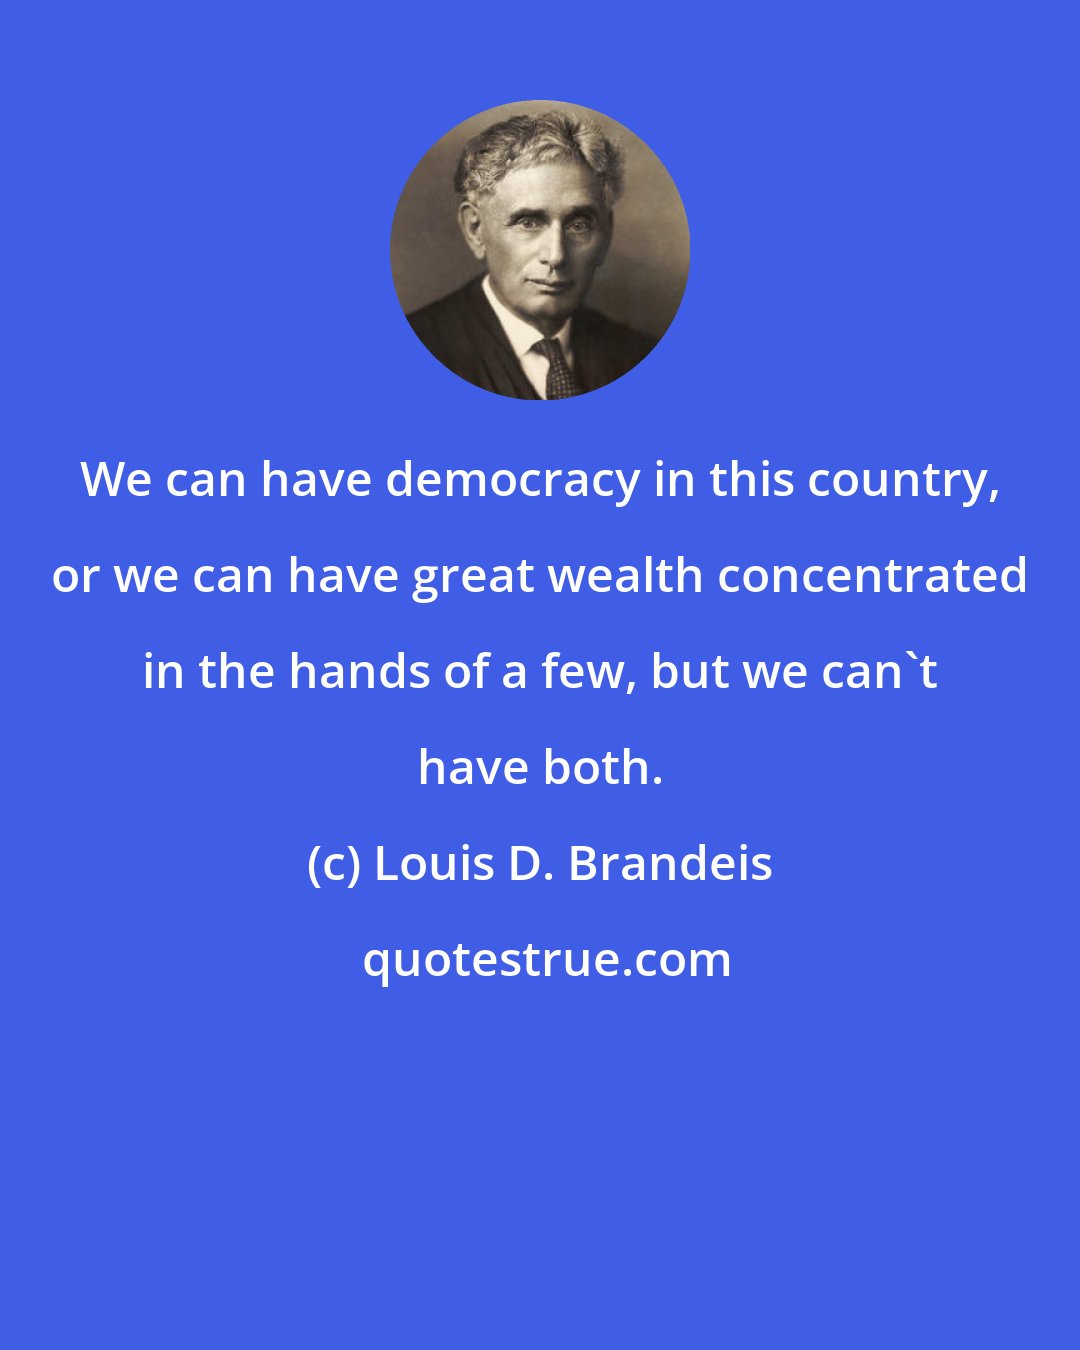 Louis D. Brandeis: We can have democracy in this country, or we can have great wealth concentrated in the hands of a few, but we can't have both.